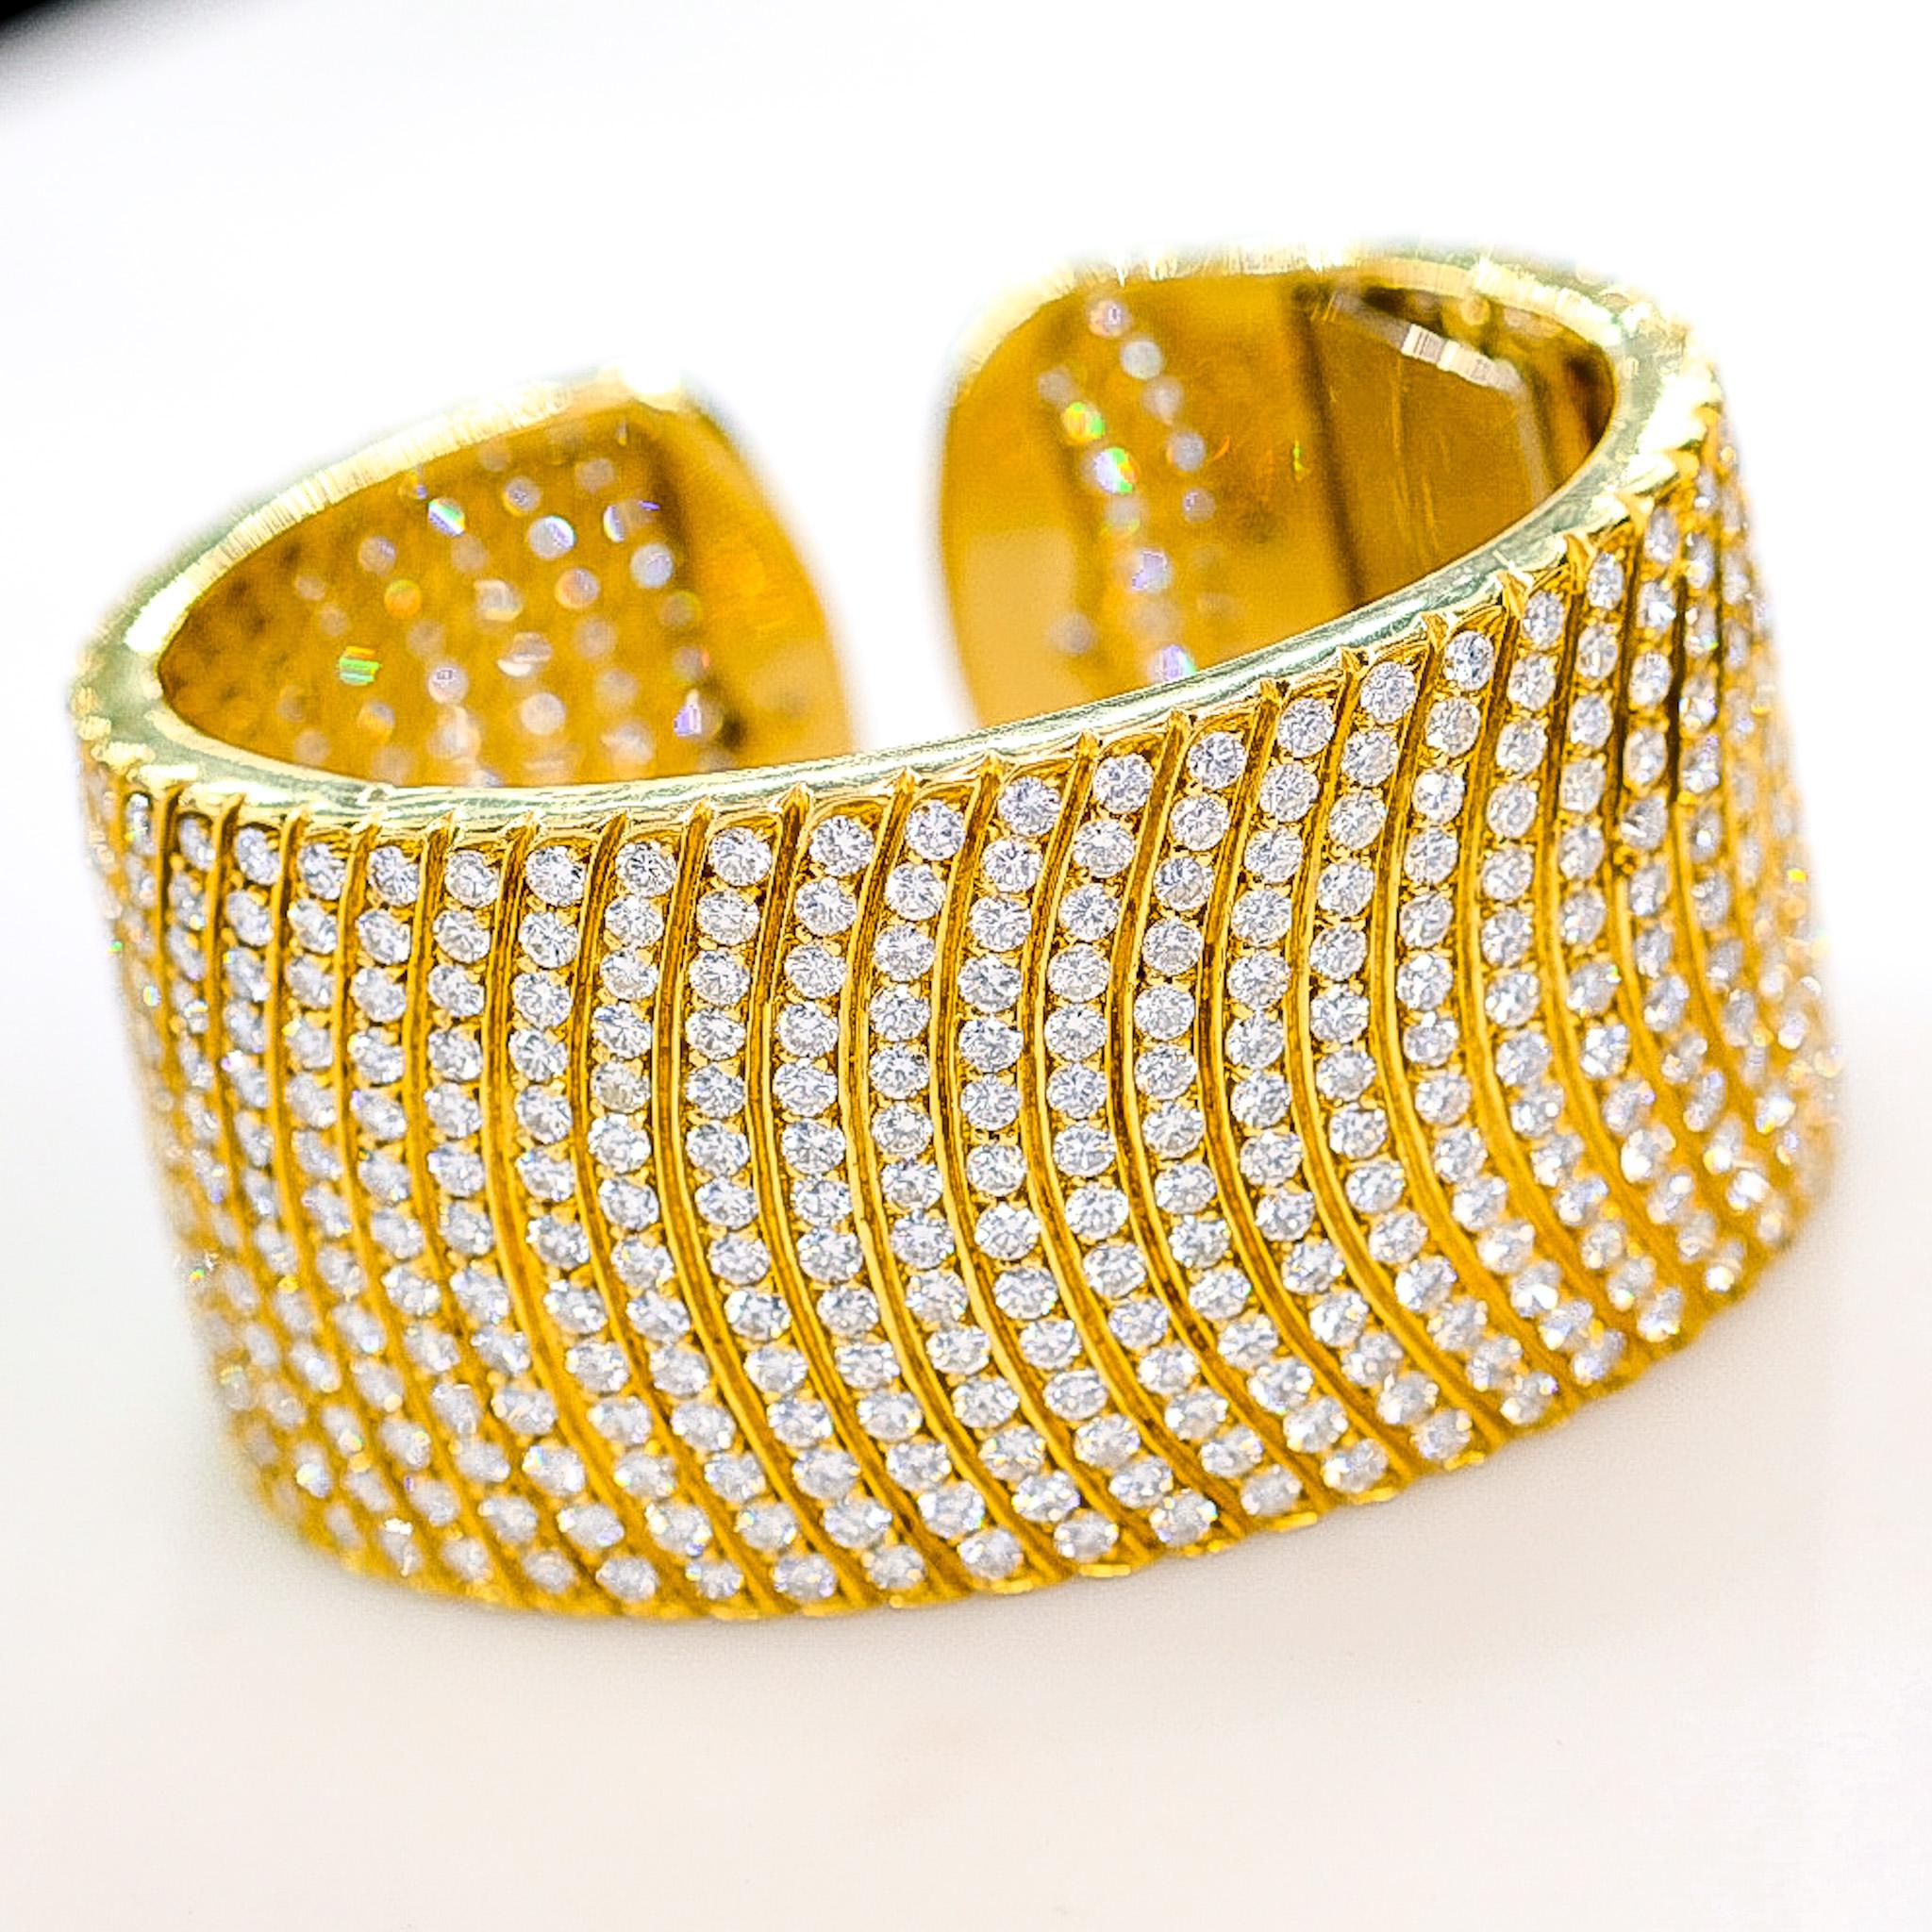 This is a stunning diamond cuff bracelet made in 18k yellow gold encrusted with 32 carats of round brilliant cut diamonds. This cuff bracelet is a luxurious piece and is exceptionally brilliant. 
You will love this bracelet when you open the box: